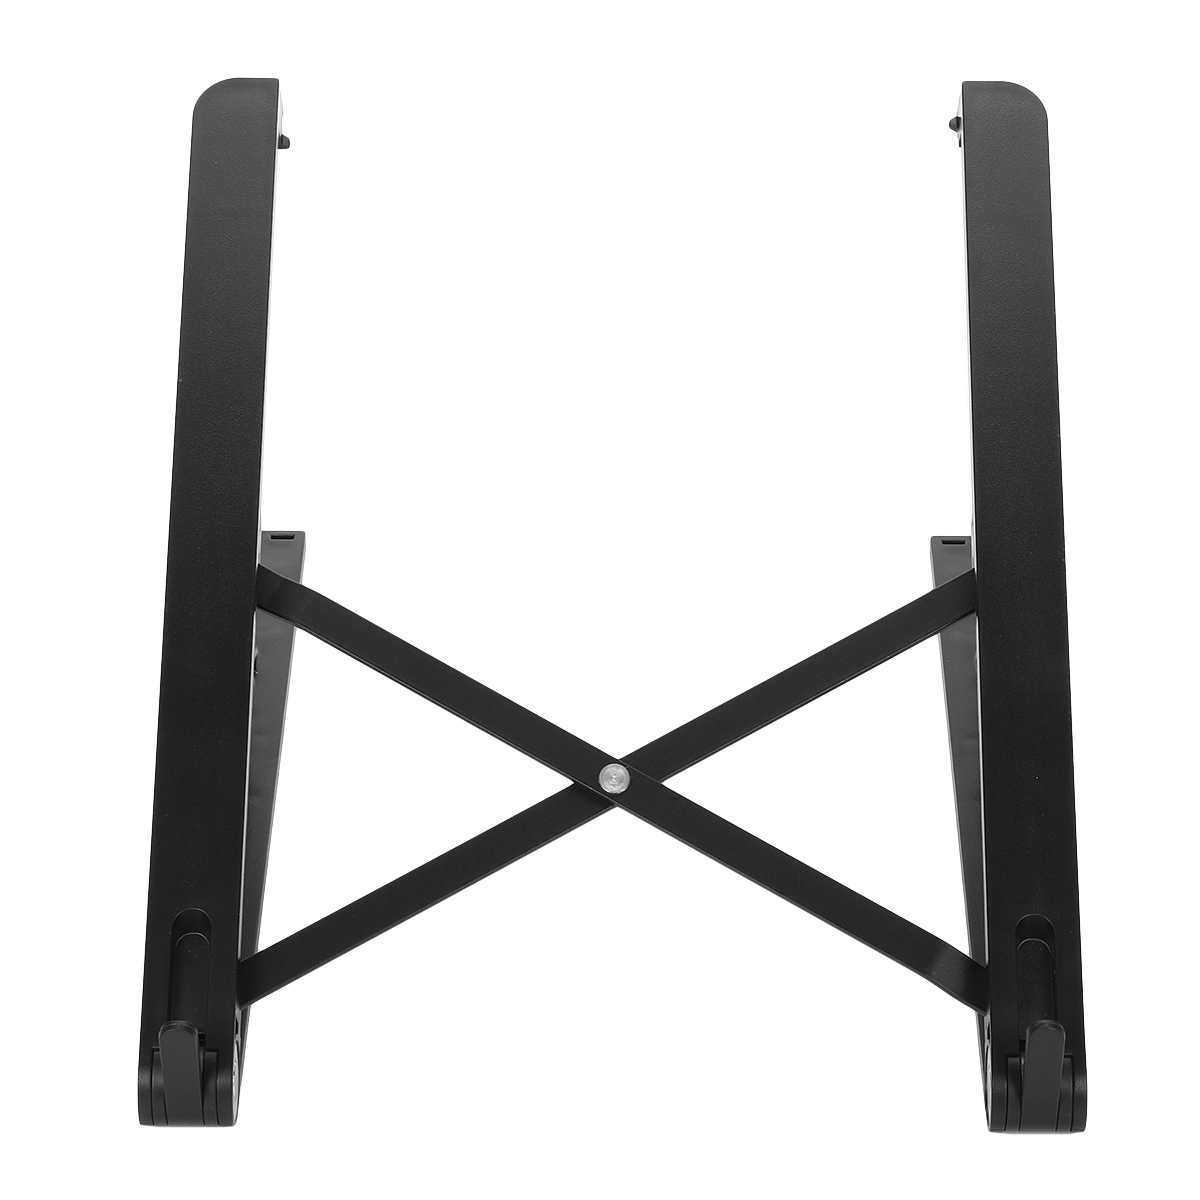 Foldable-5-Height-Adjustable-Laptop-Stand-Tablet-Stand-Heat-Dissipation-for-iPad-Macbook-below-17-in-1700967-6